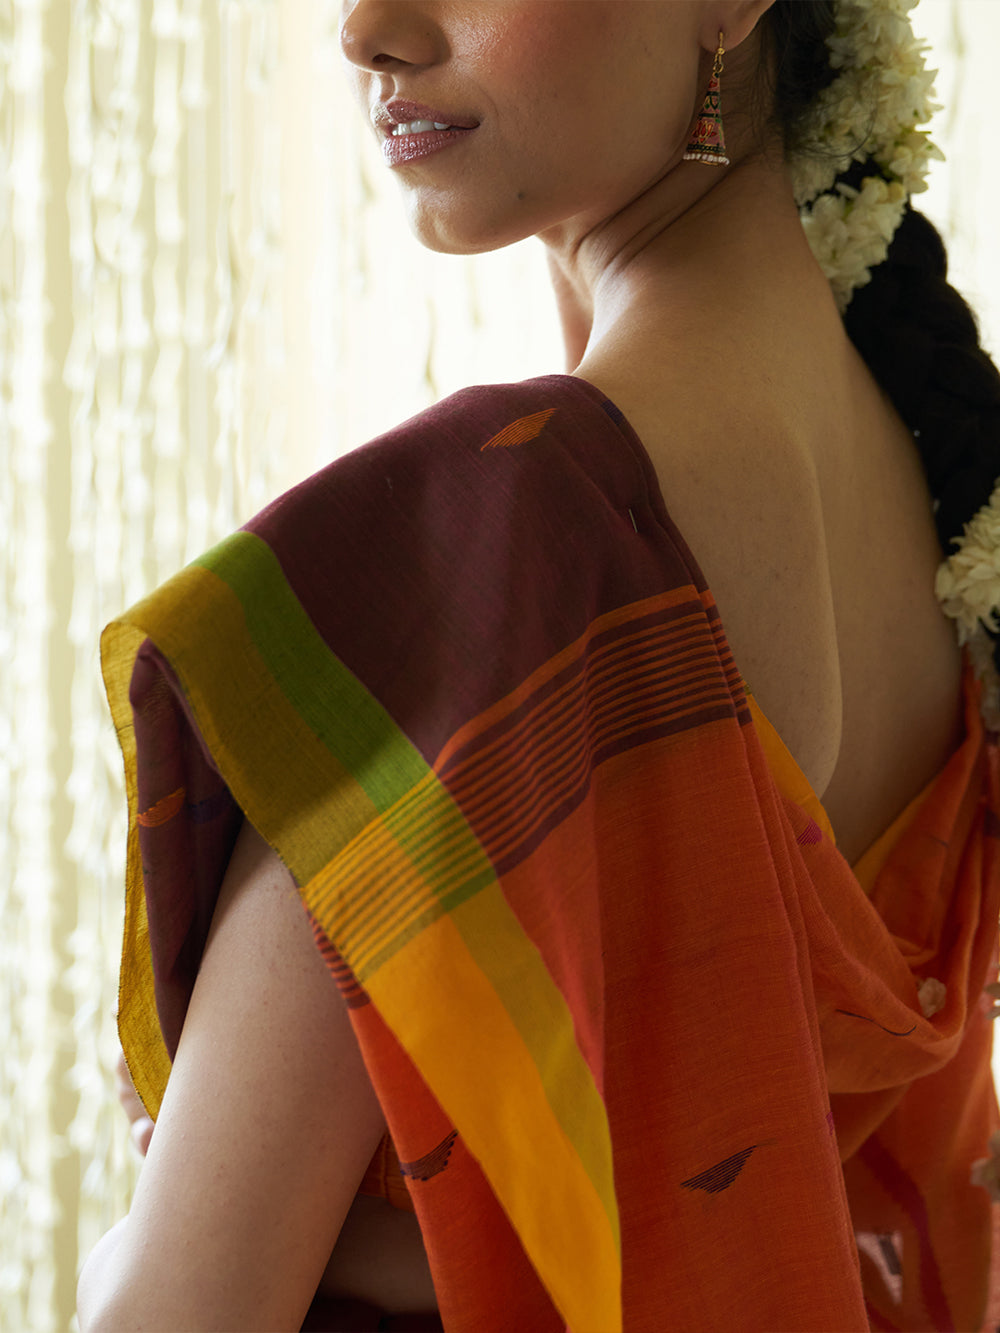 Yellow-Green Border With Motifs All Over Saree